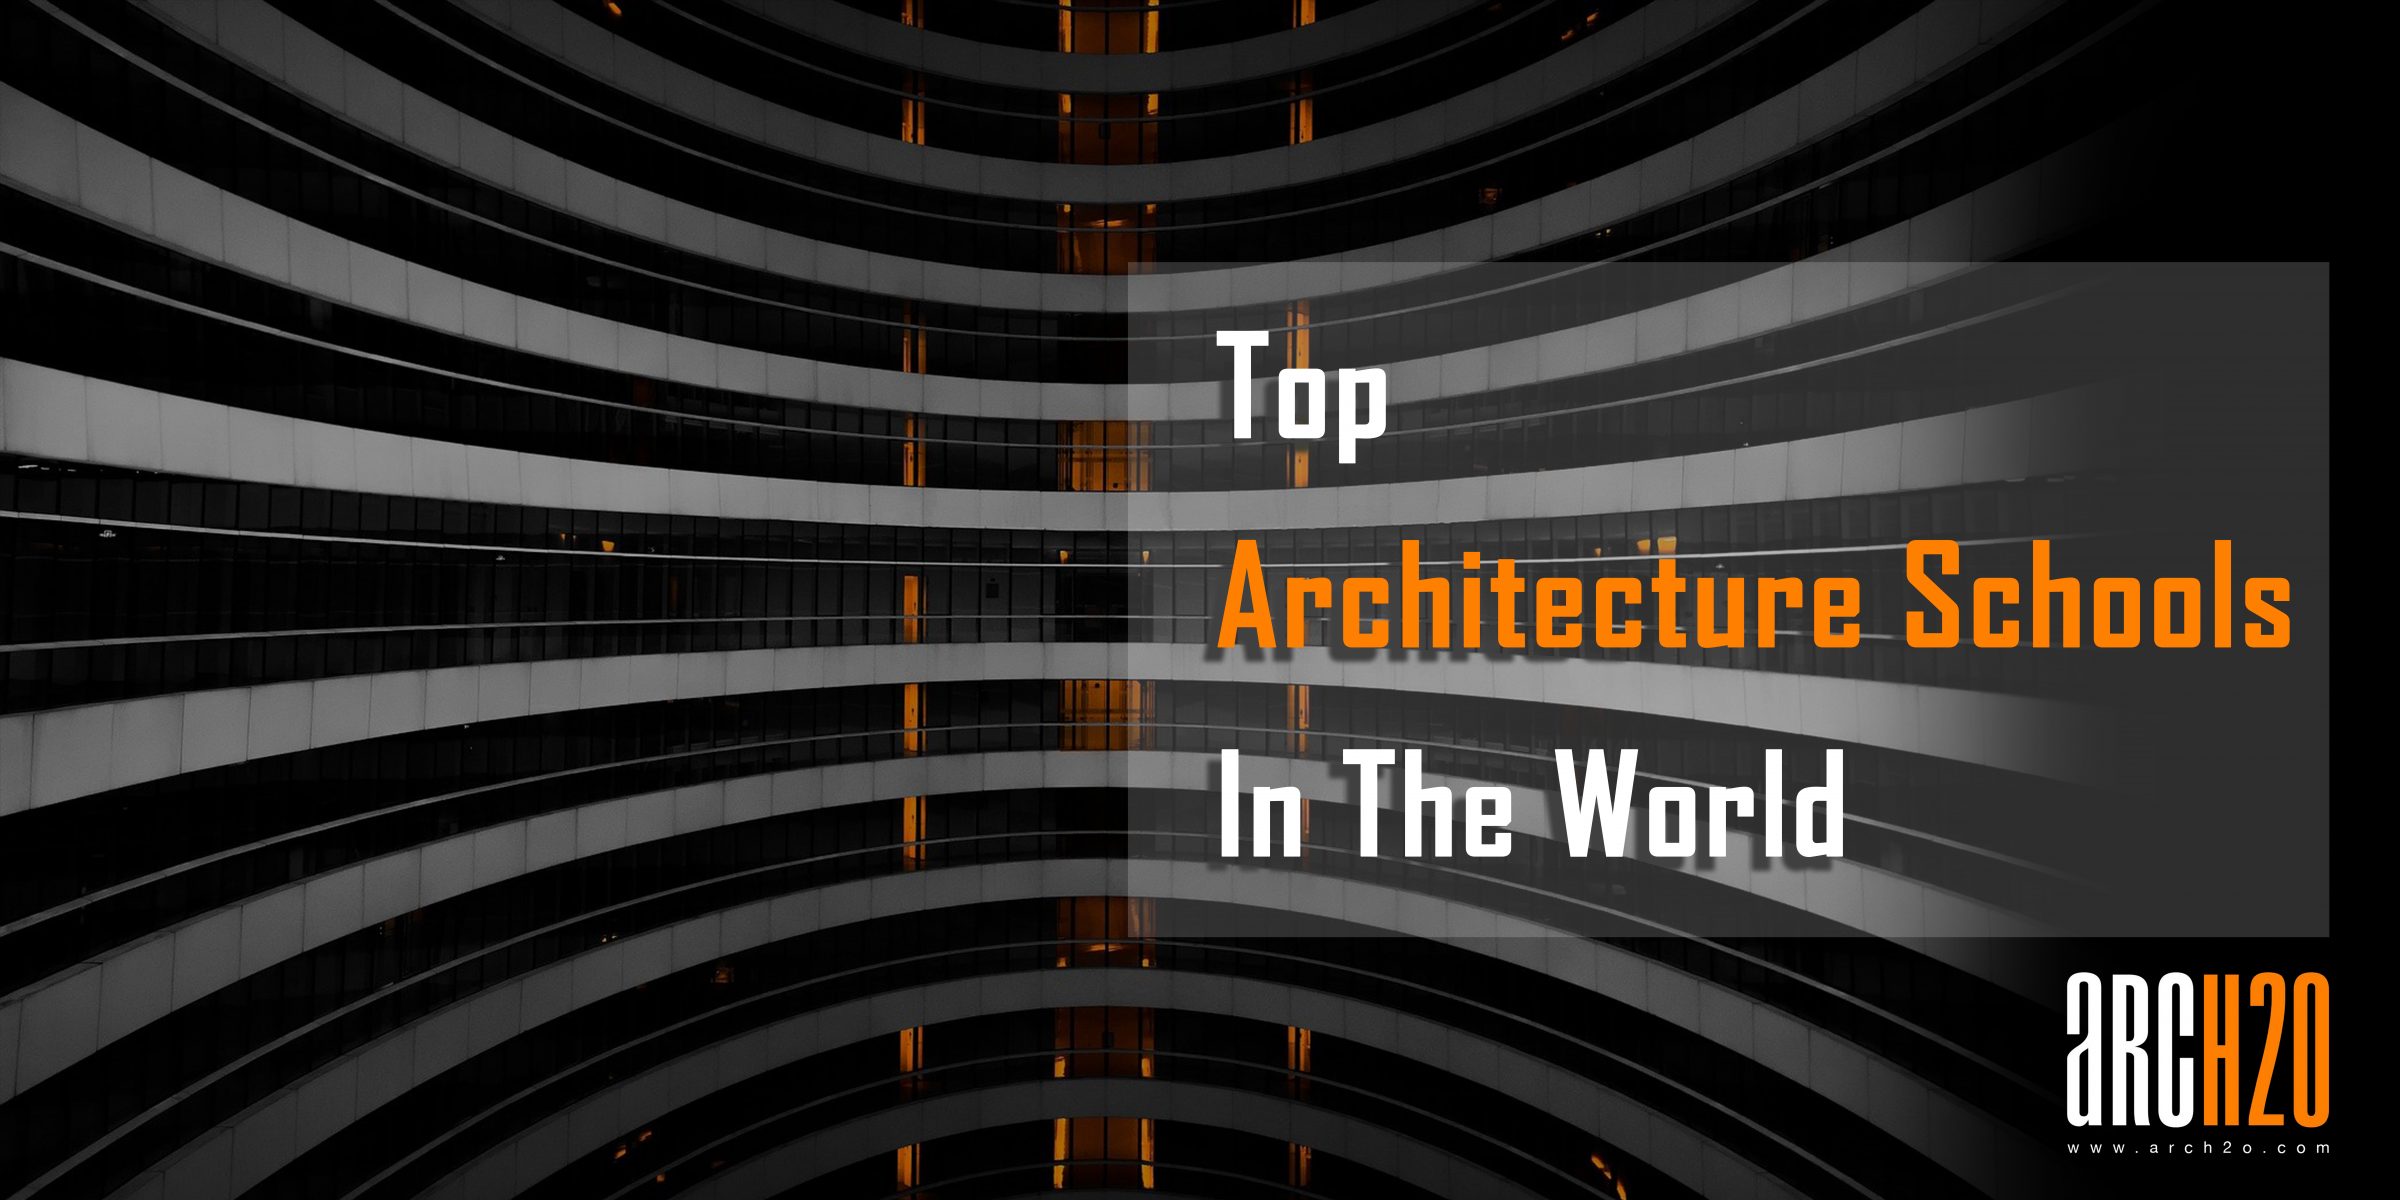 Top Architecture Schools in the World